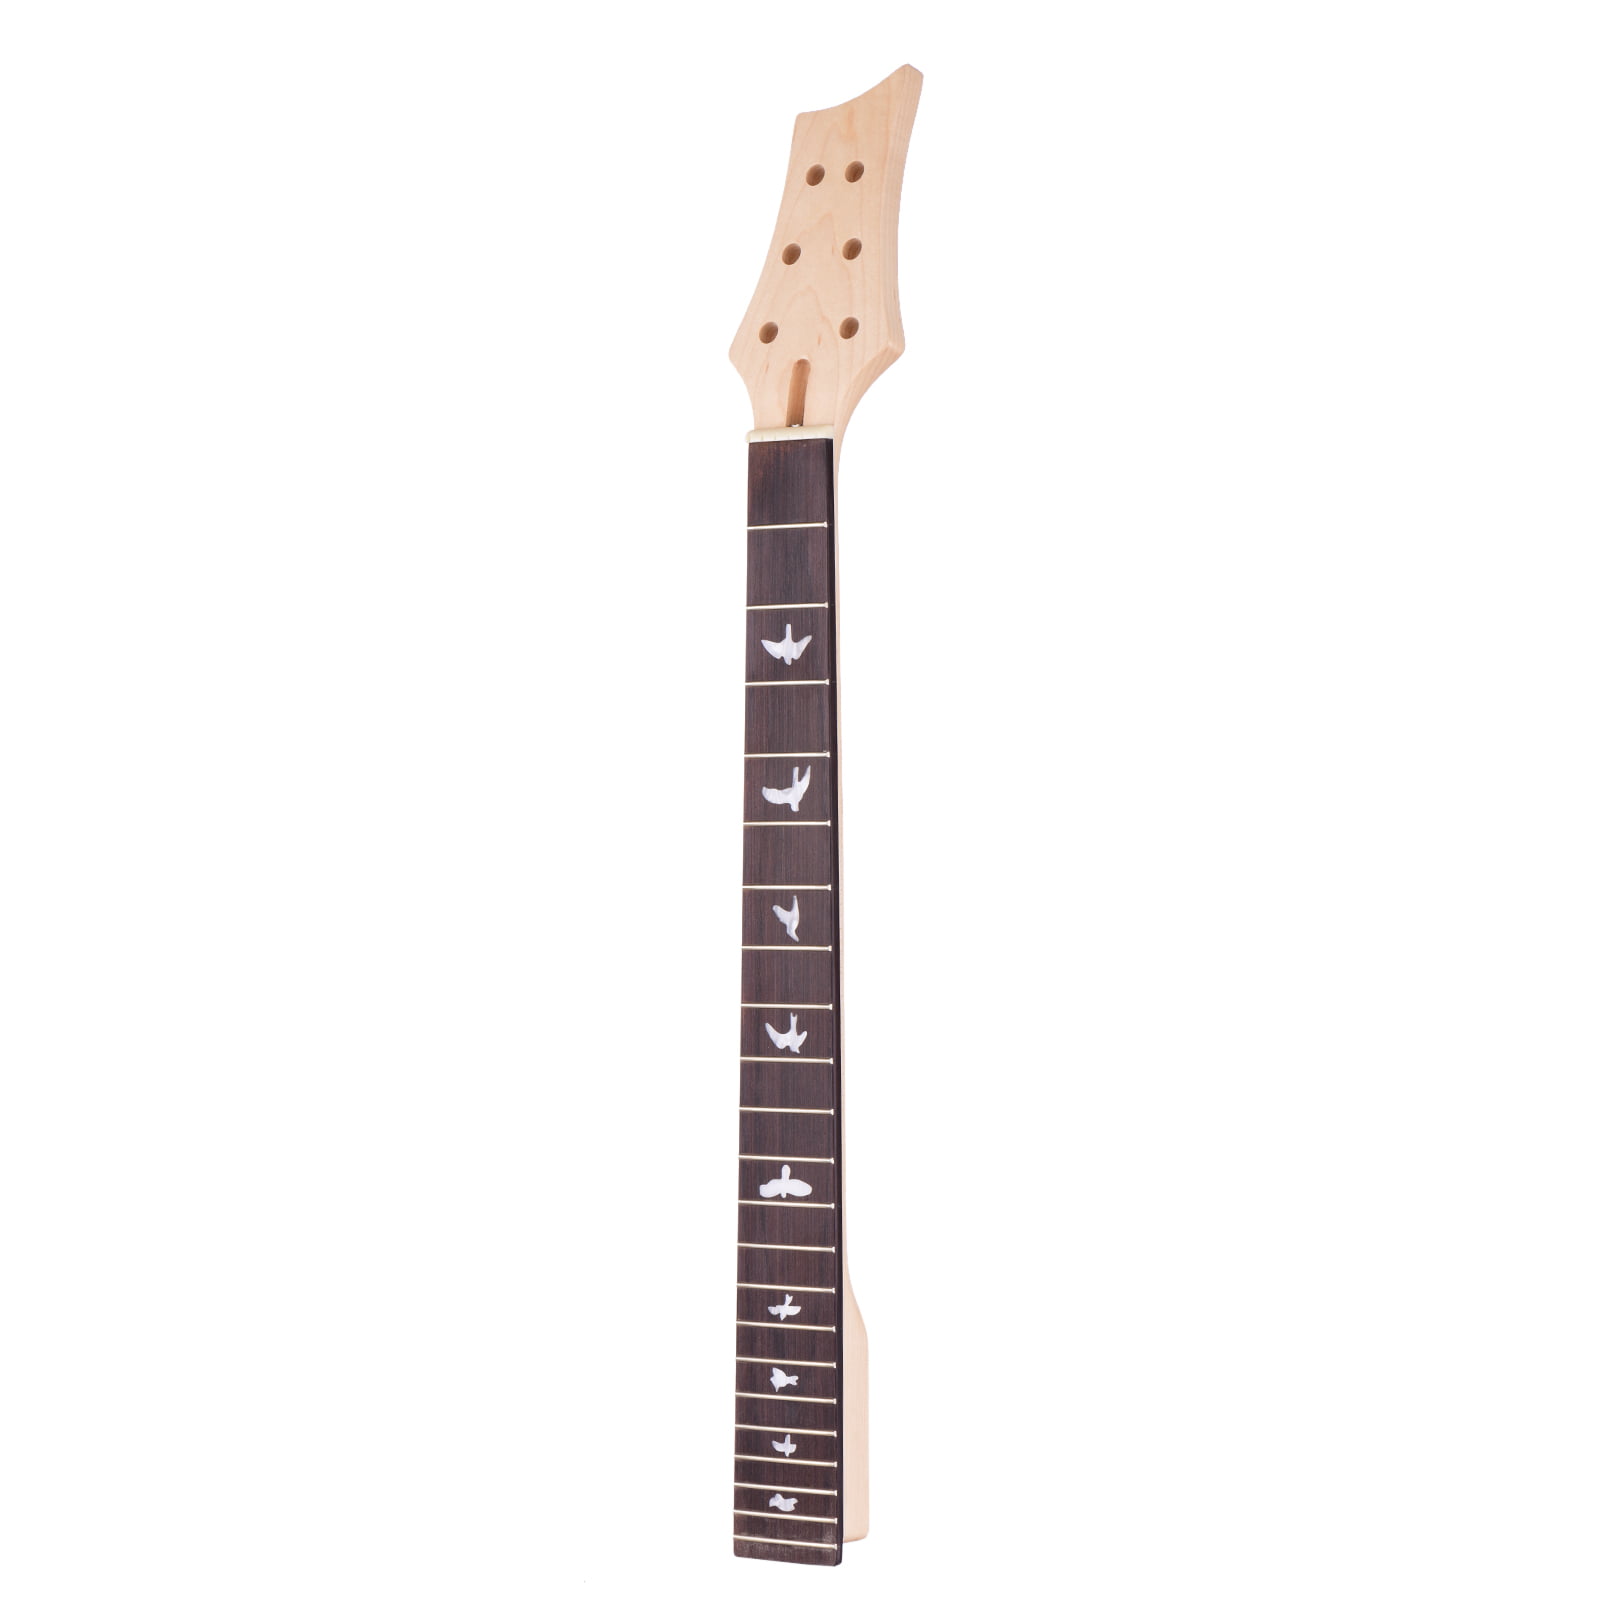 with White Birds Inlay Replacement,Wood 22 Frets Maple Wood Fingerboard ABMBERTK Universal Unfinished Electric Guitar Neck